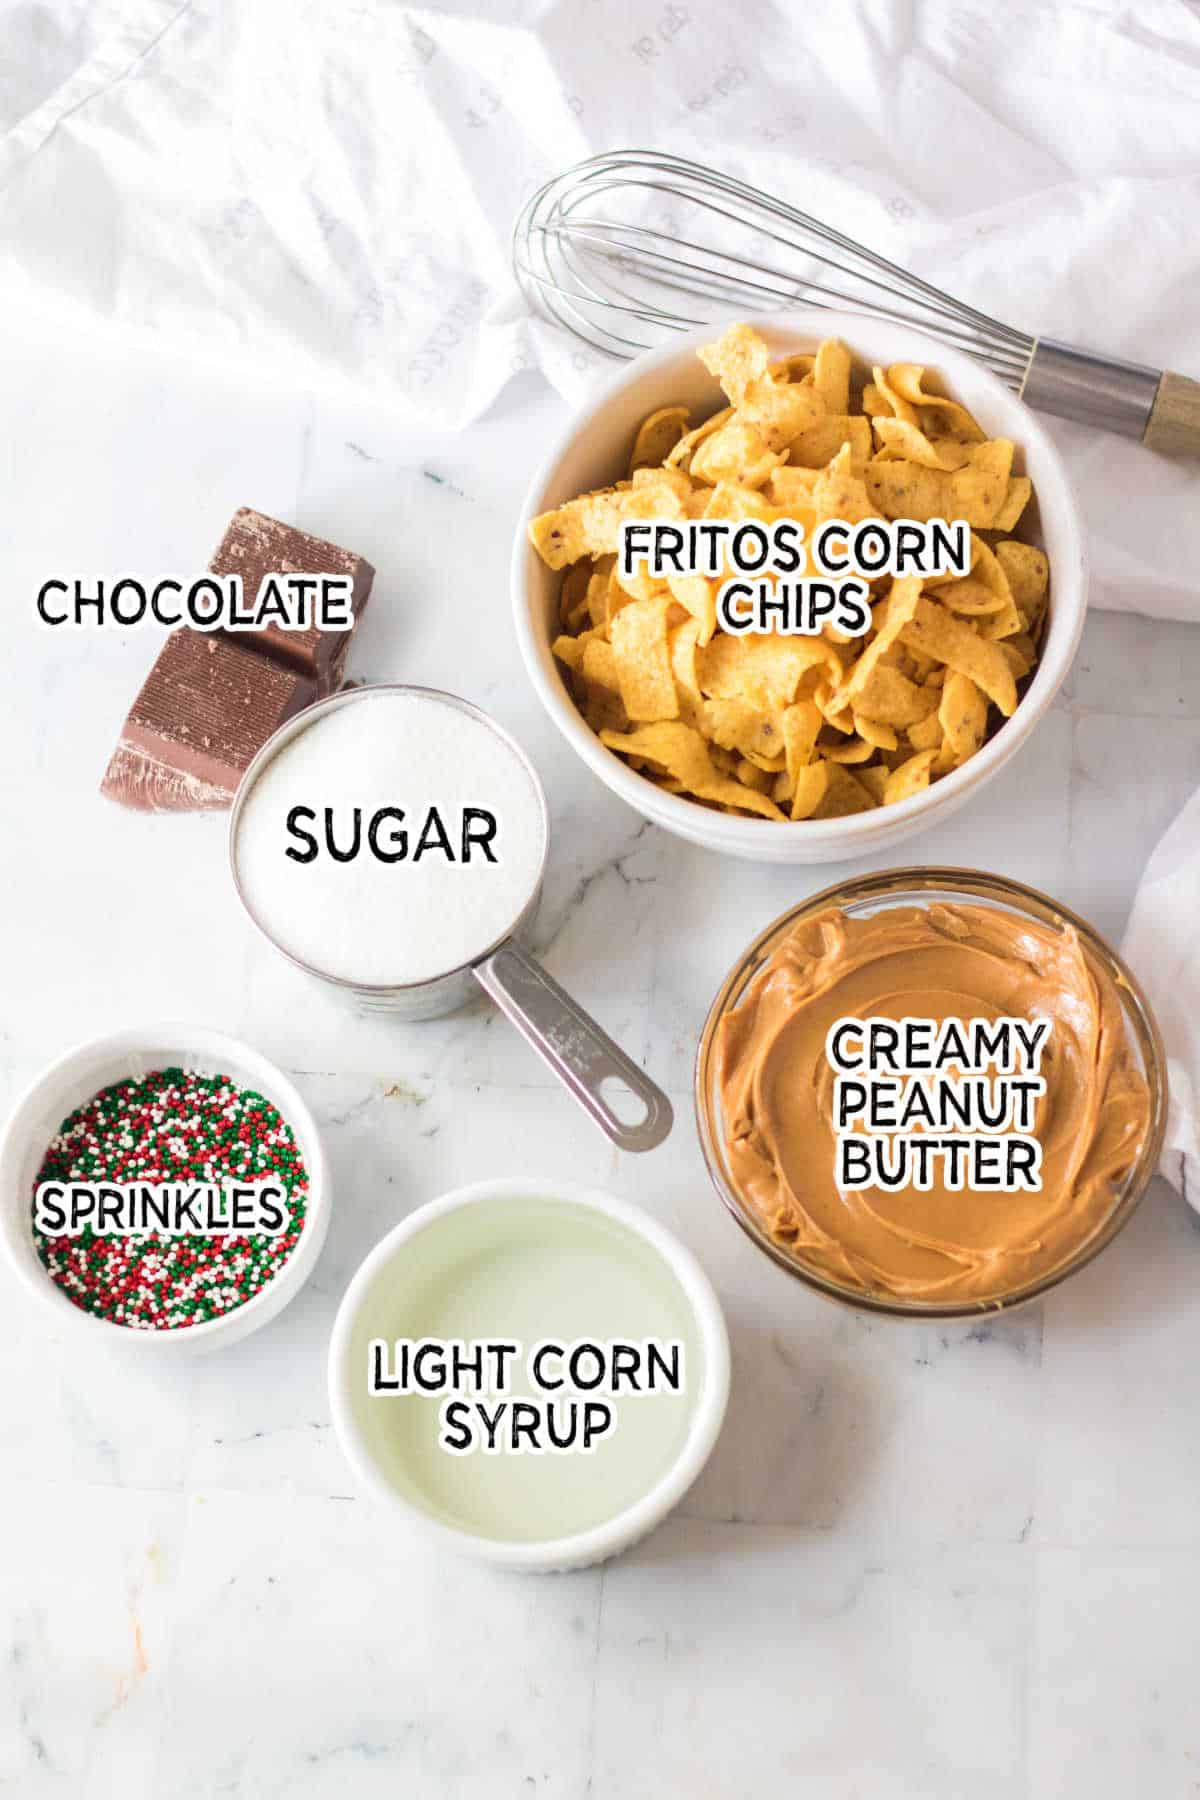 Ingredients to make Frito Candy.